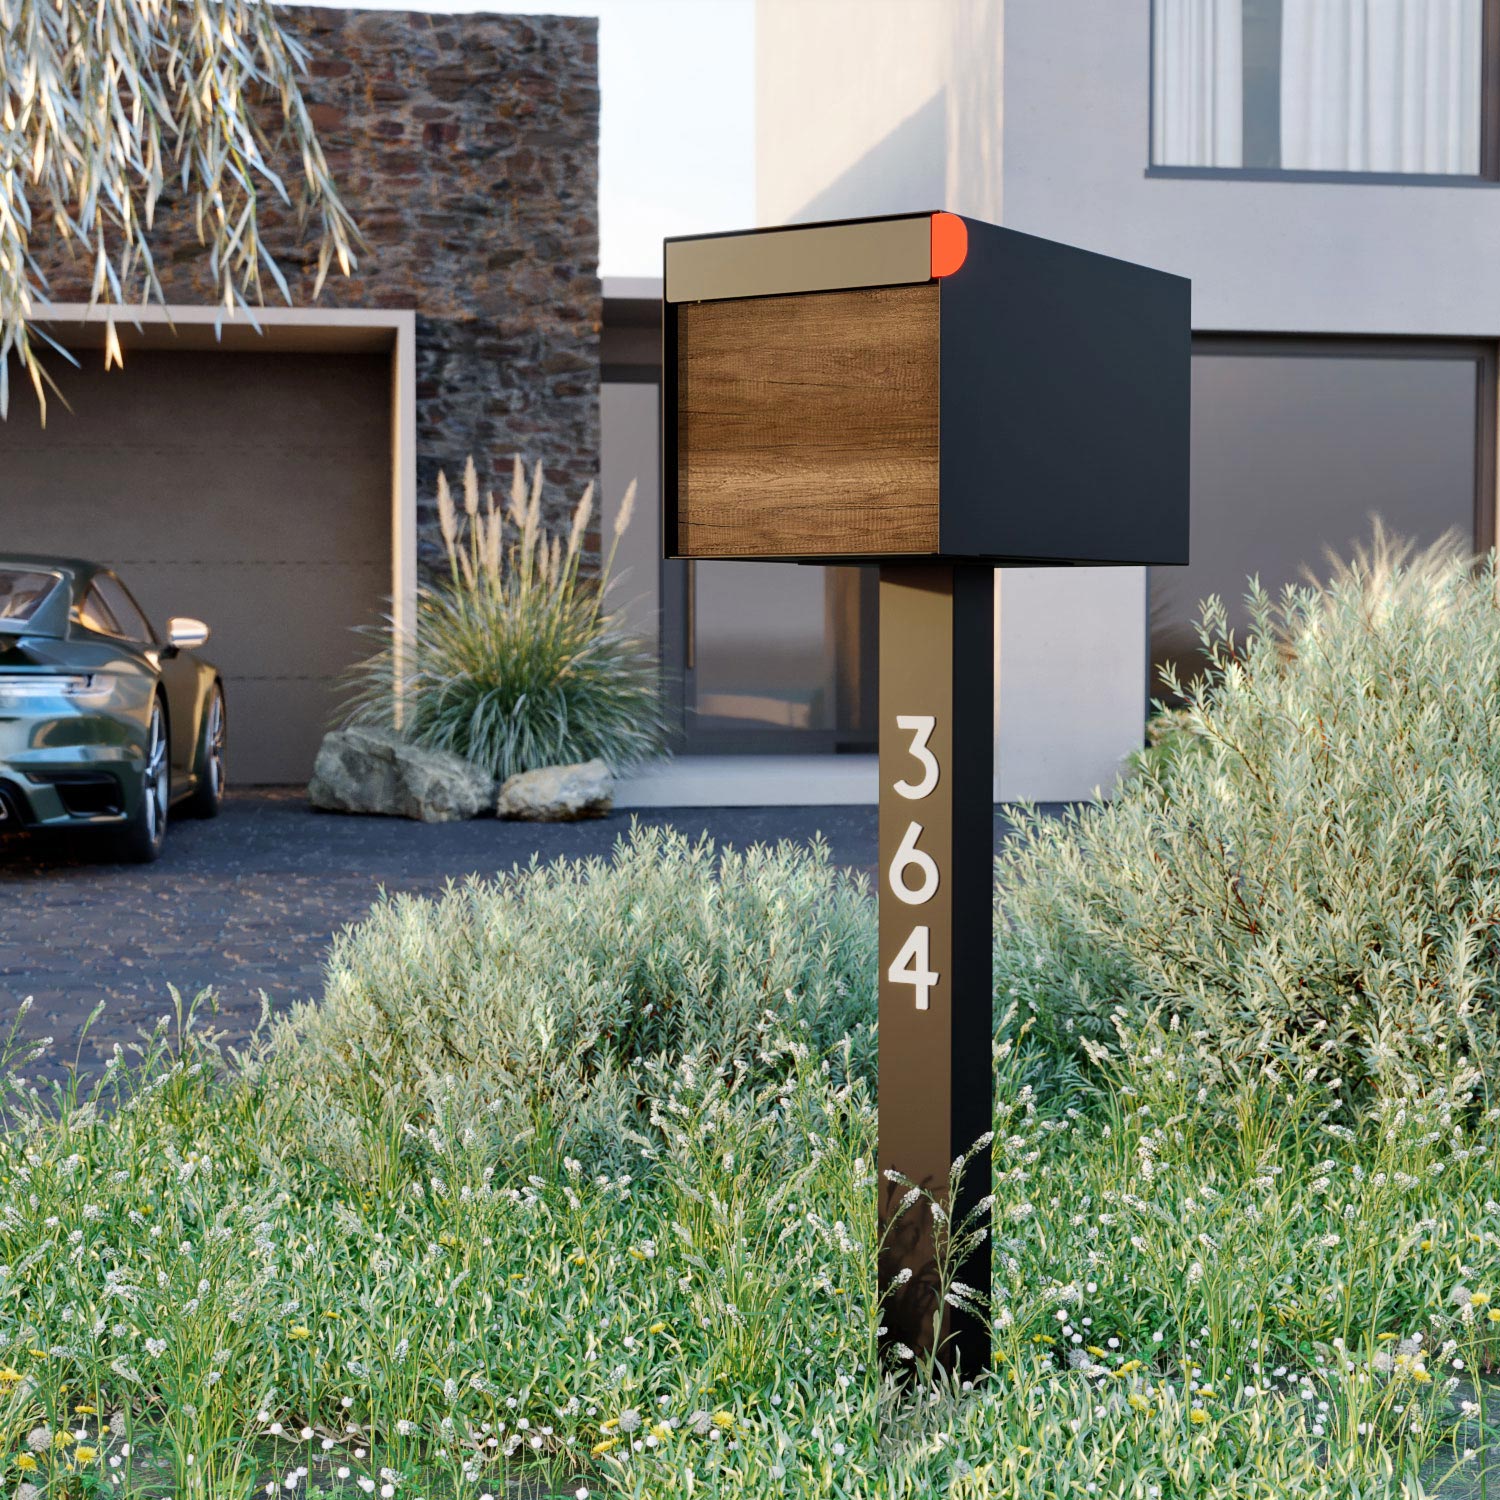 Town Square by Bravios - Large Capacity Mailbox with Post - Black with